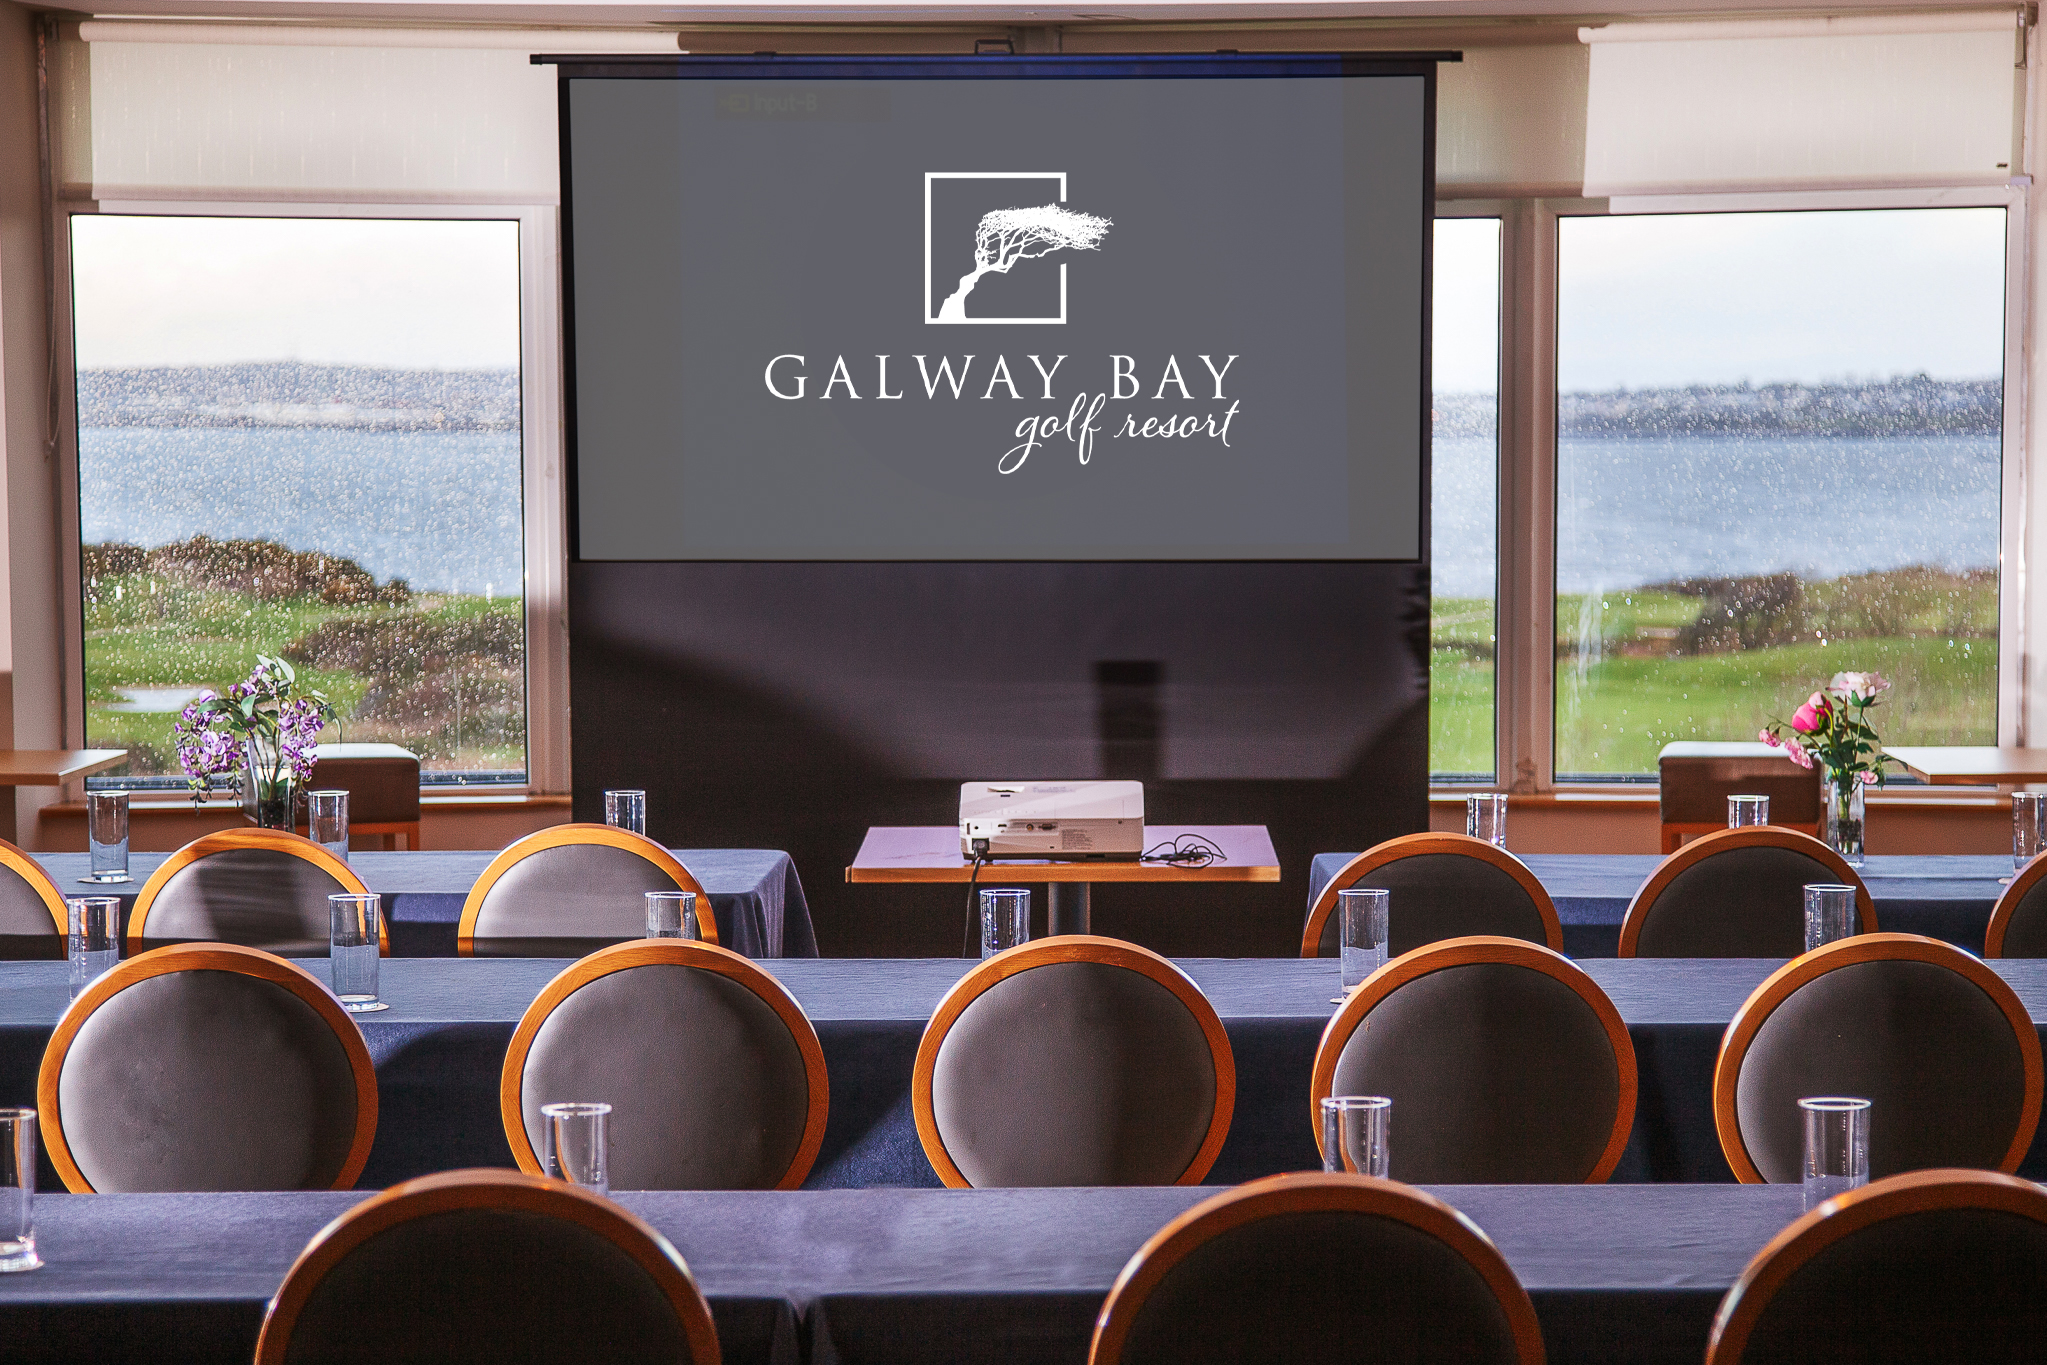 meeting room at Galway Bay Golf Resort, desks and chairs lined up